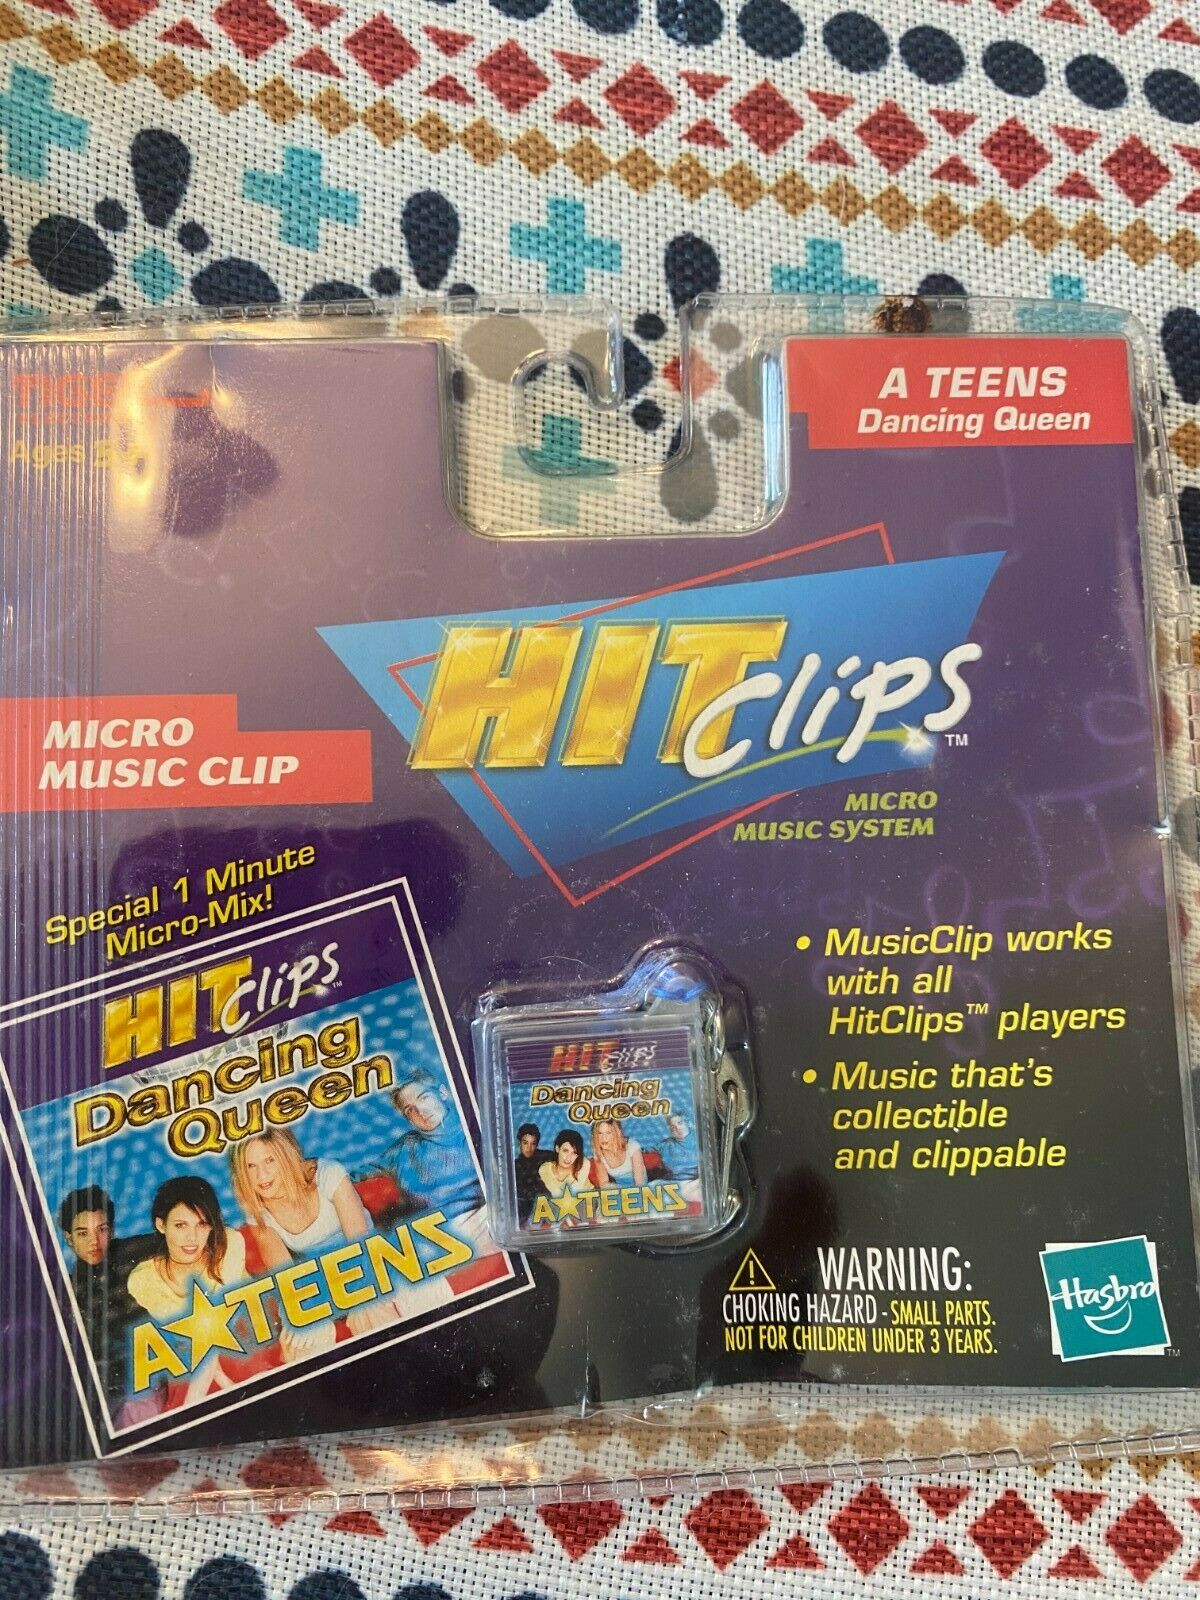 Hit Clips A Teens “Dancing Queen” Micro Music Clip NEW in box